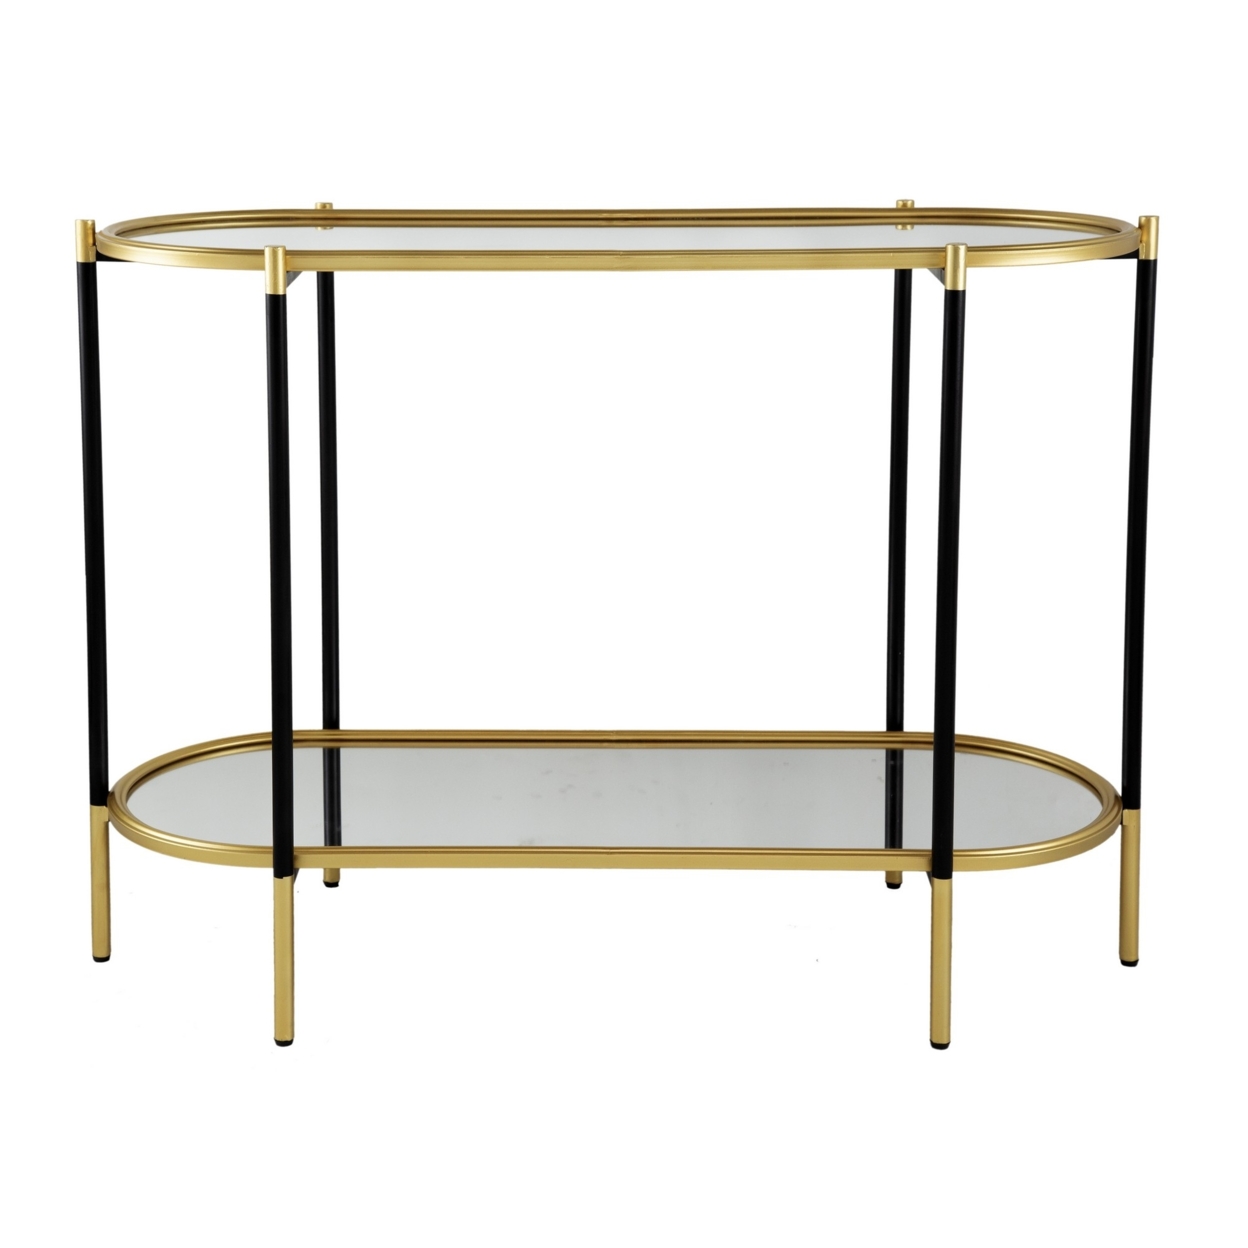 30 Inch Console Sideboard Table, Oblong, Mirrored Top, Black, Gold, Saltoro Sherpi